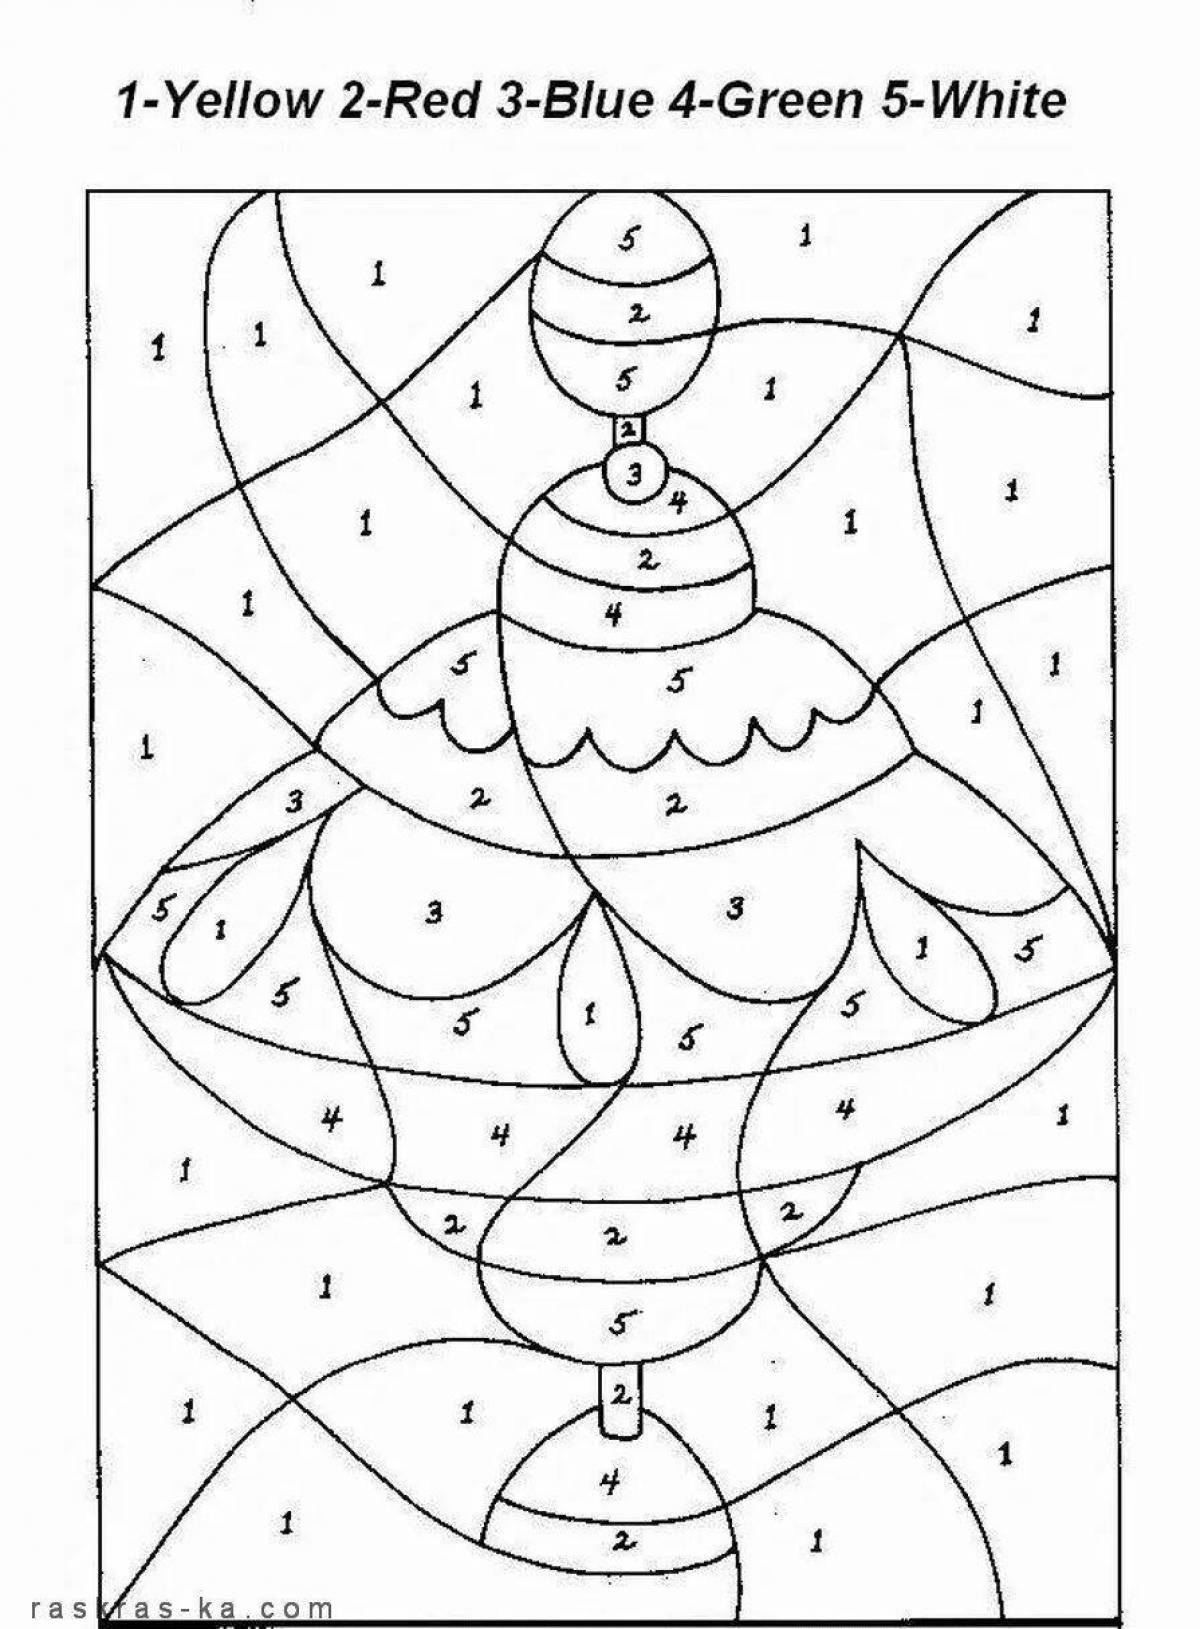 Entertaining coloring by numbers for children 4 years old